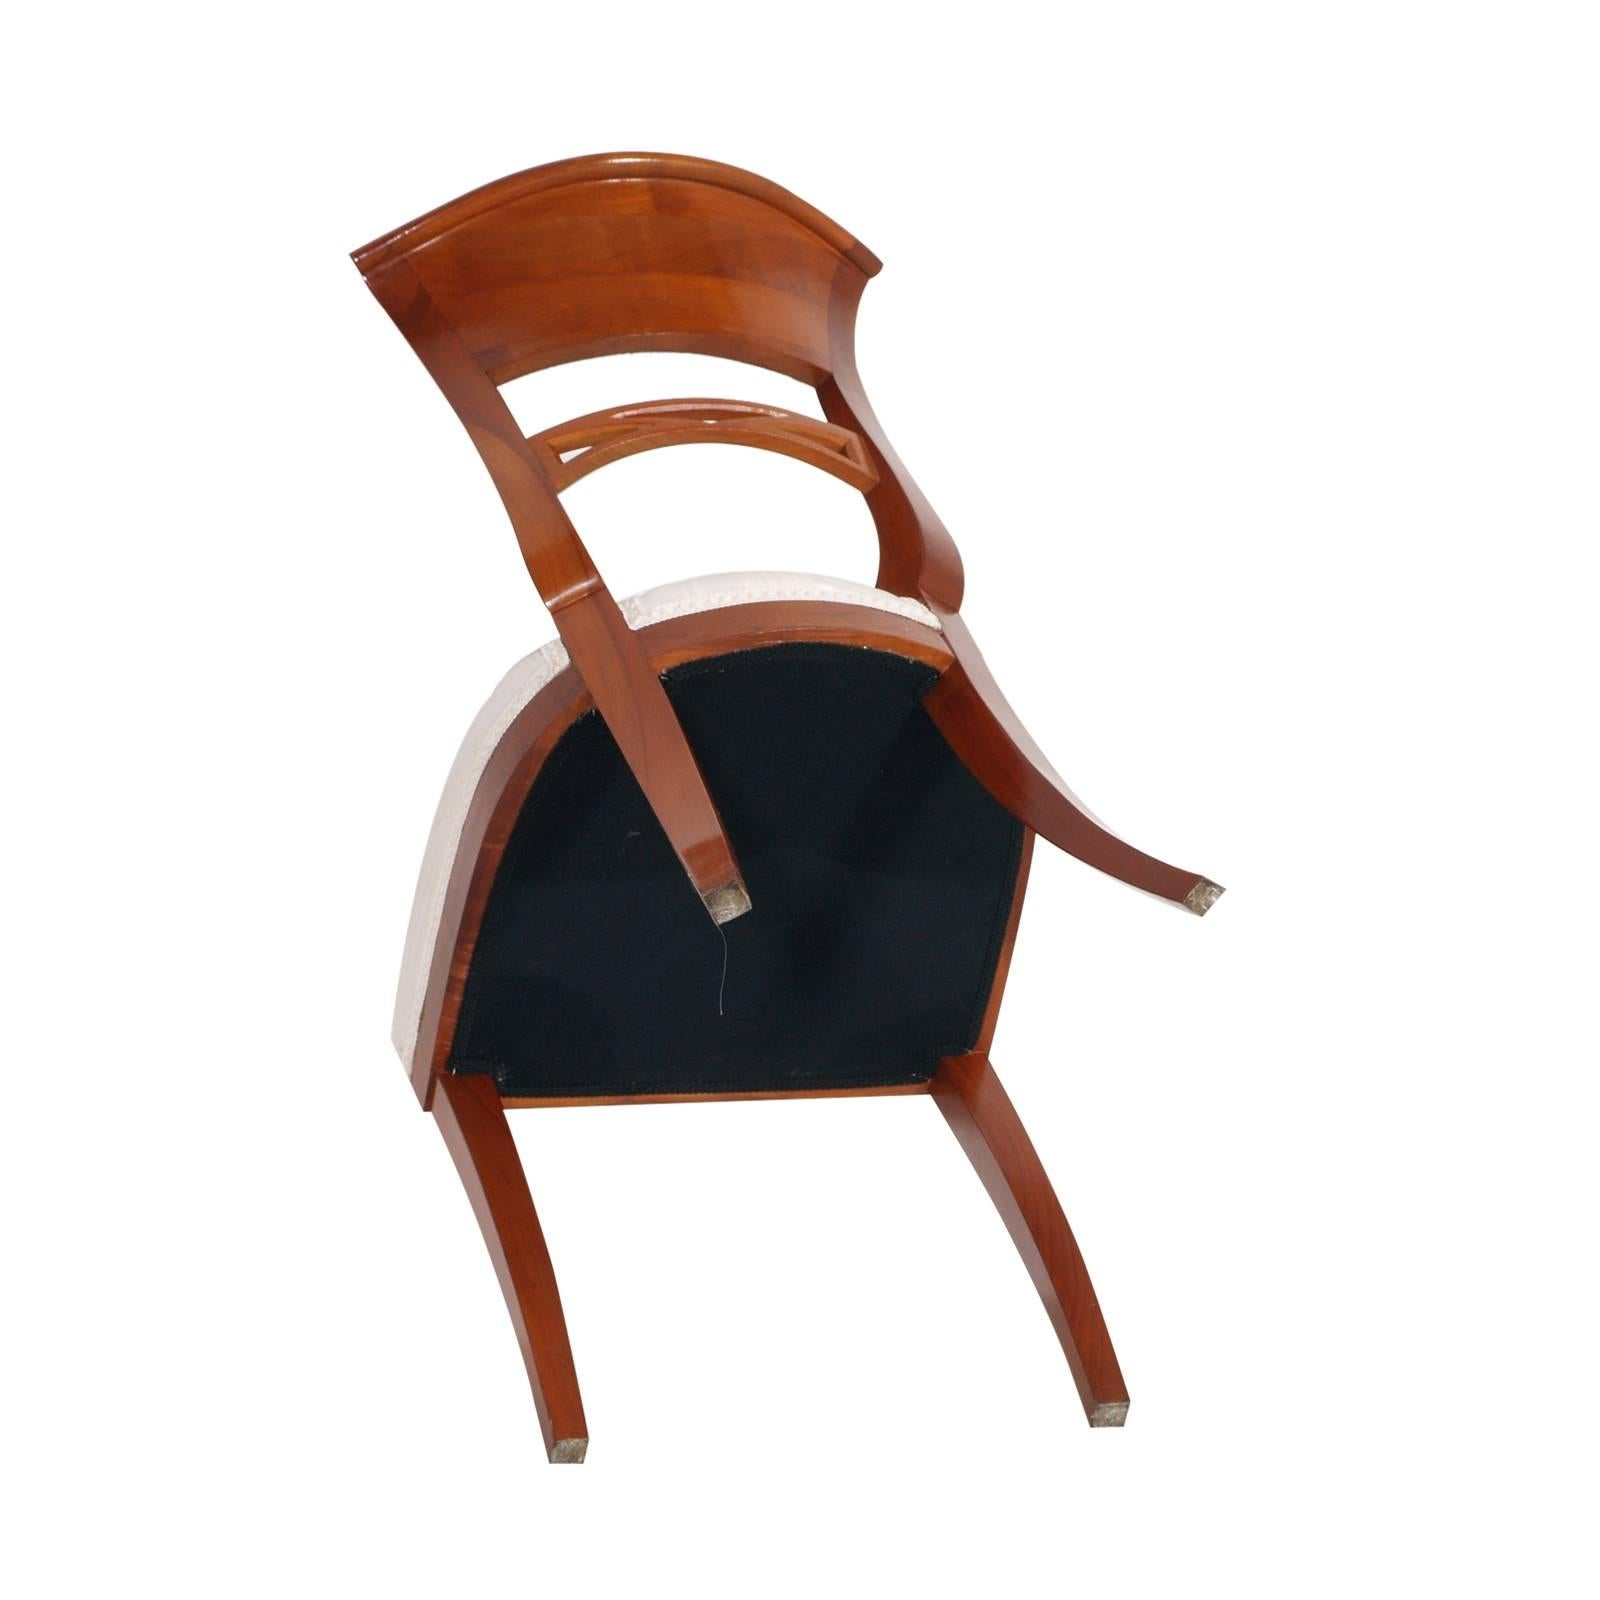 Early 20th Century Biedermeier Chair in Cherrywood Restored and Polished to Wax In Good Condition For Sale In Vigonza, Padua